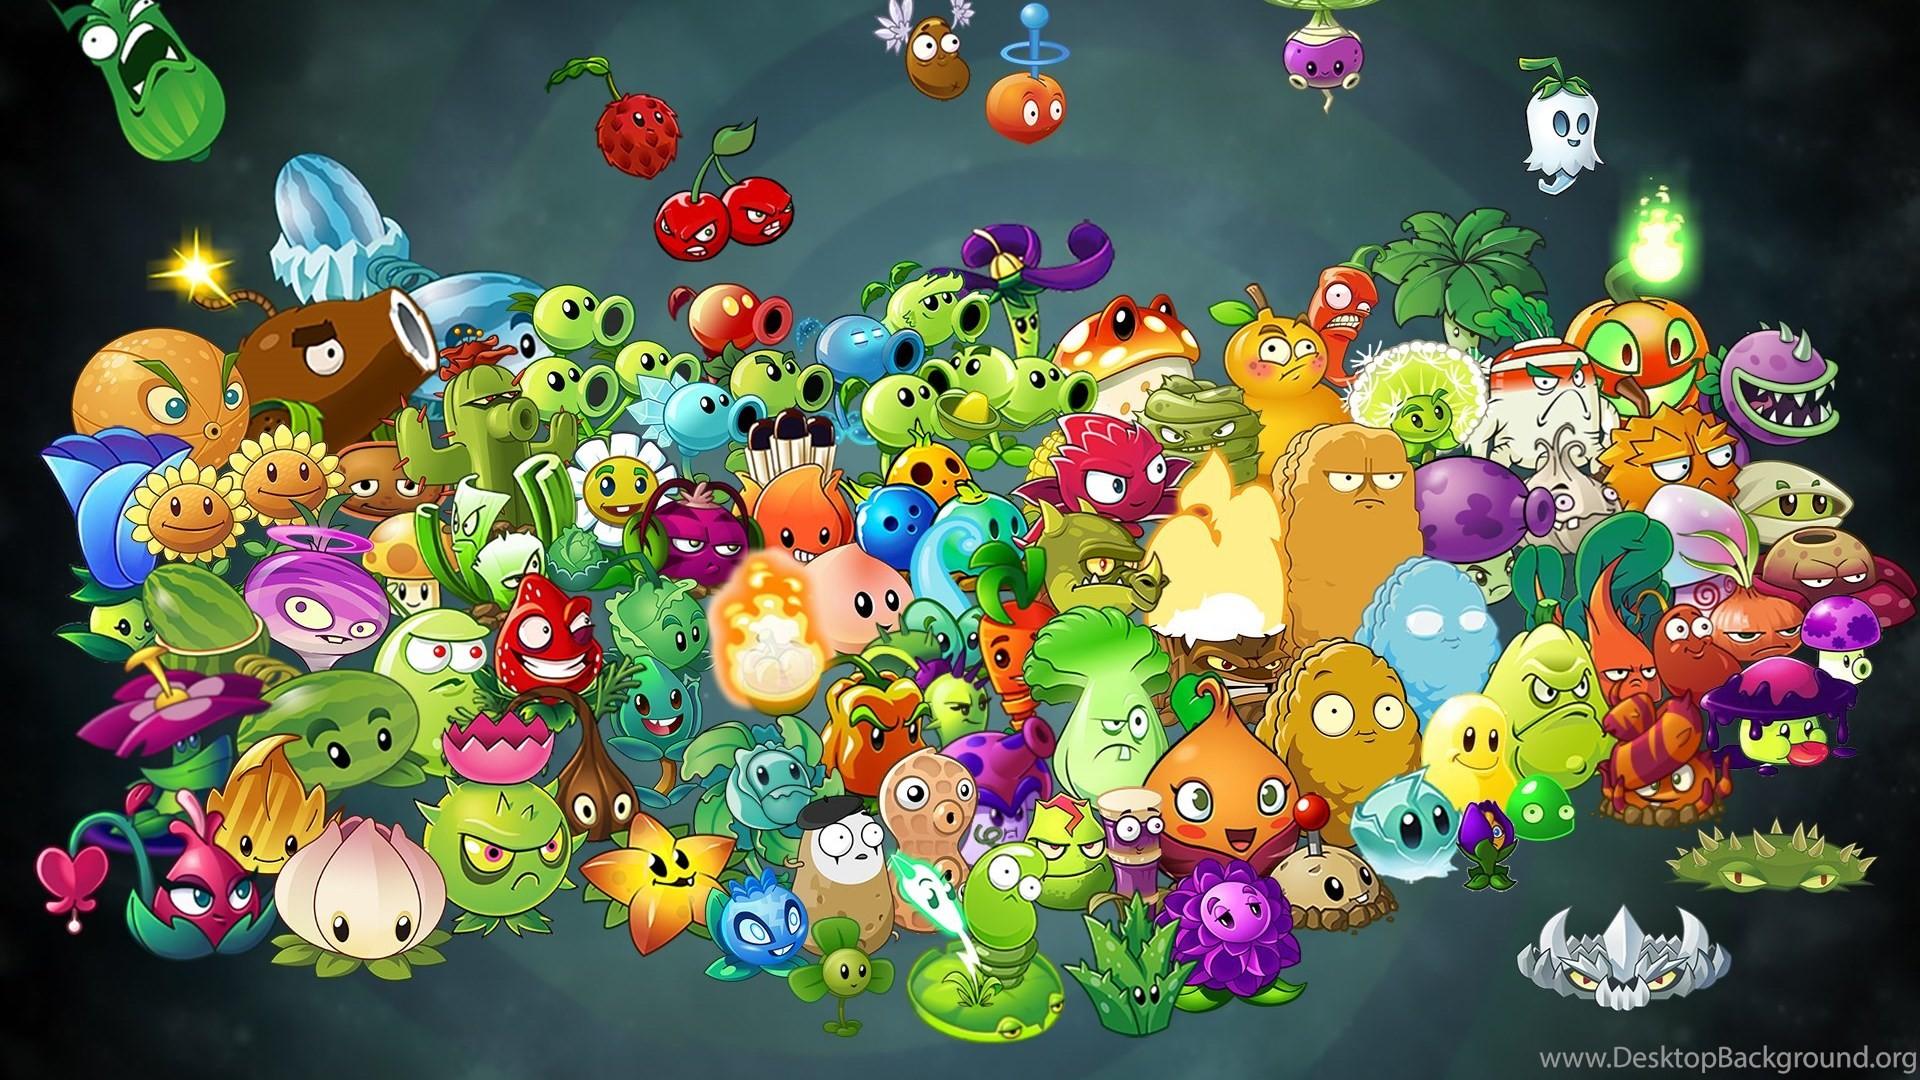 plants vs zombies 3 pc game free download full version